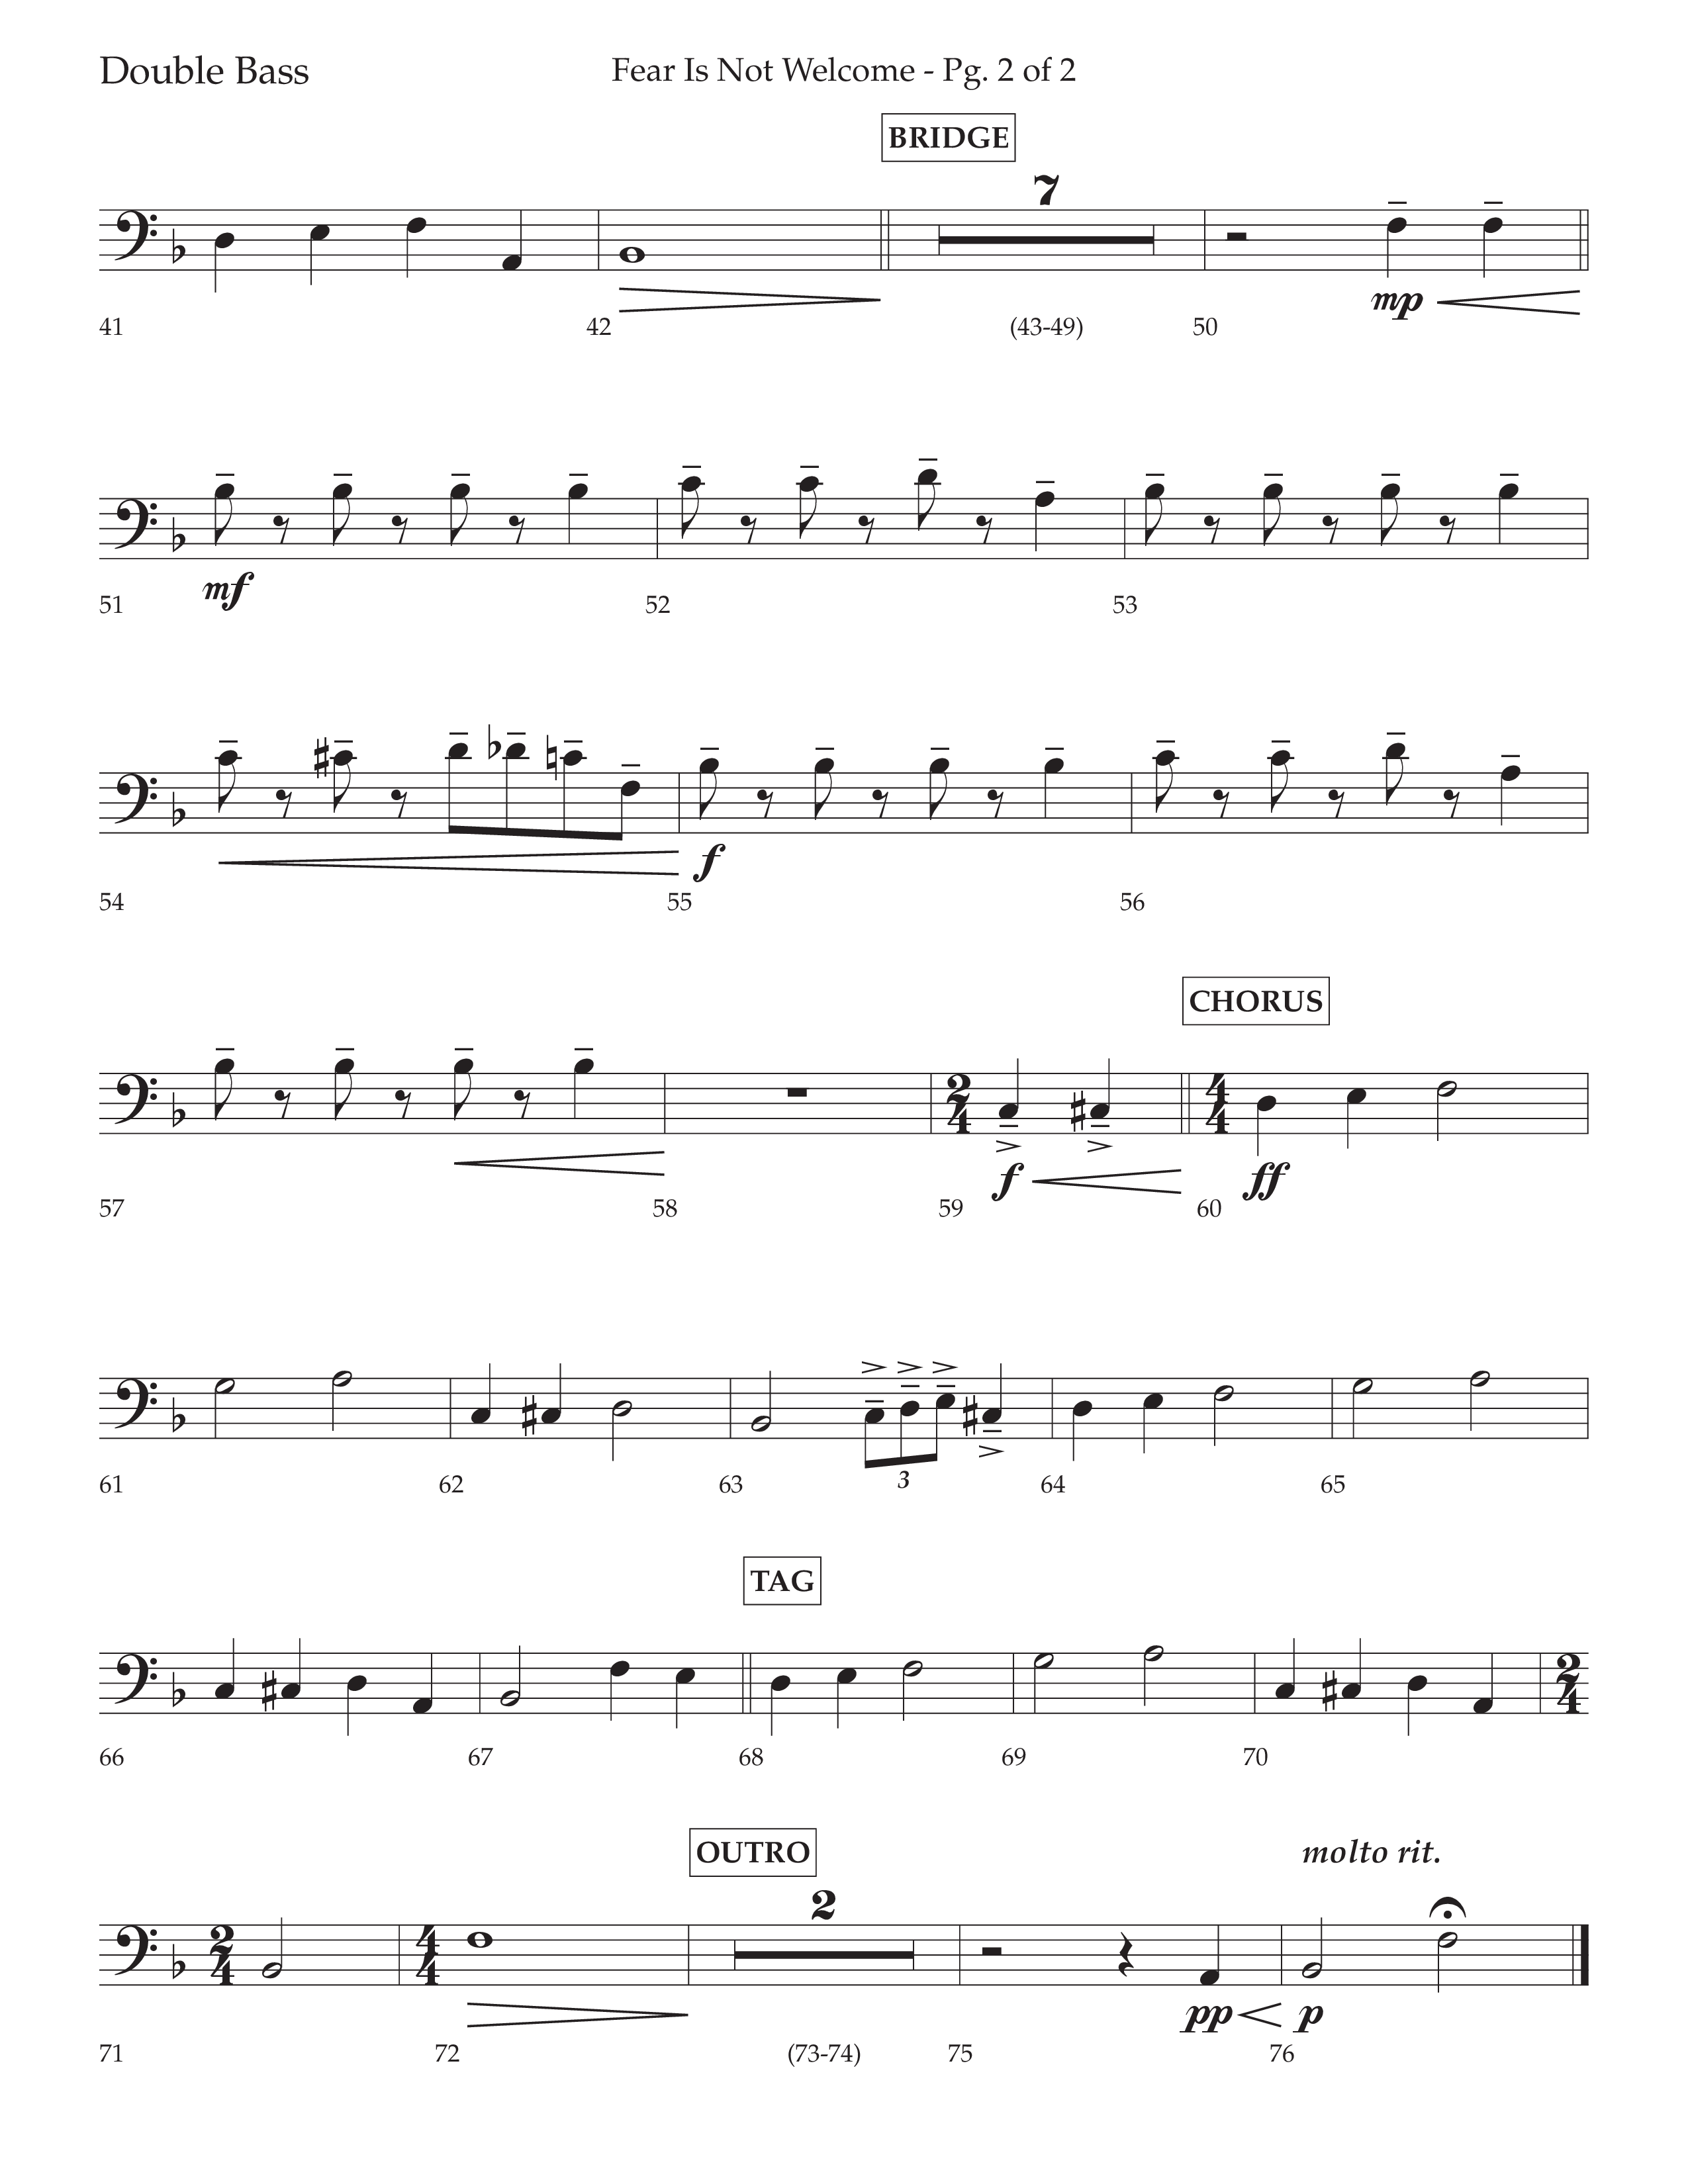 Fear Is Not Welcome (Choral Anthem SATB) Double Bass (Lifeway Choral / Arr. Cliff Duren)